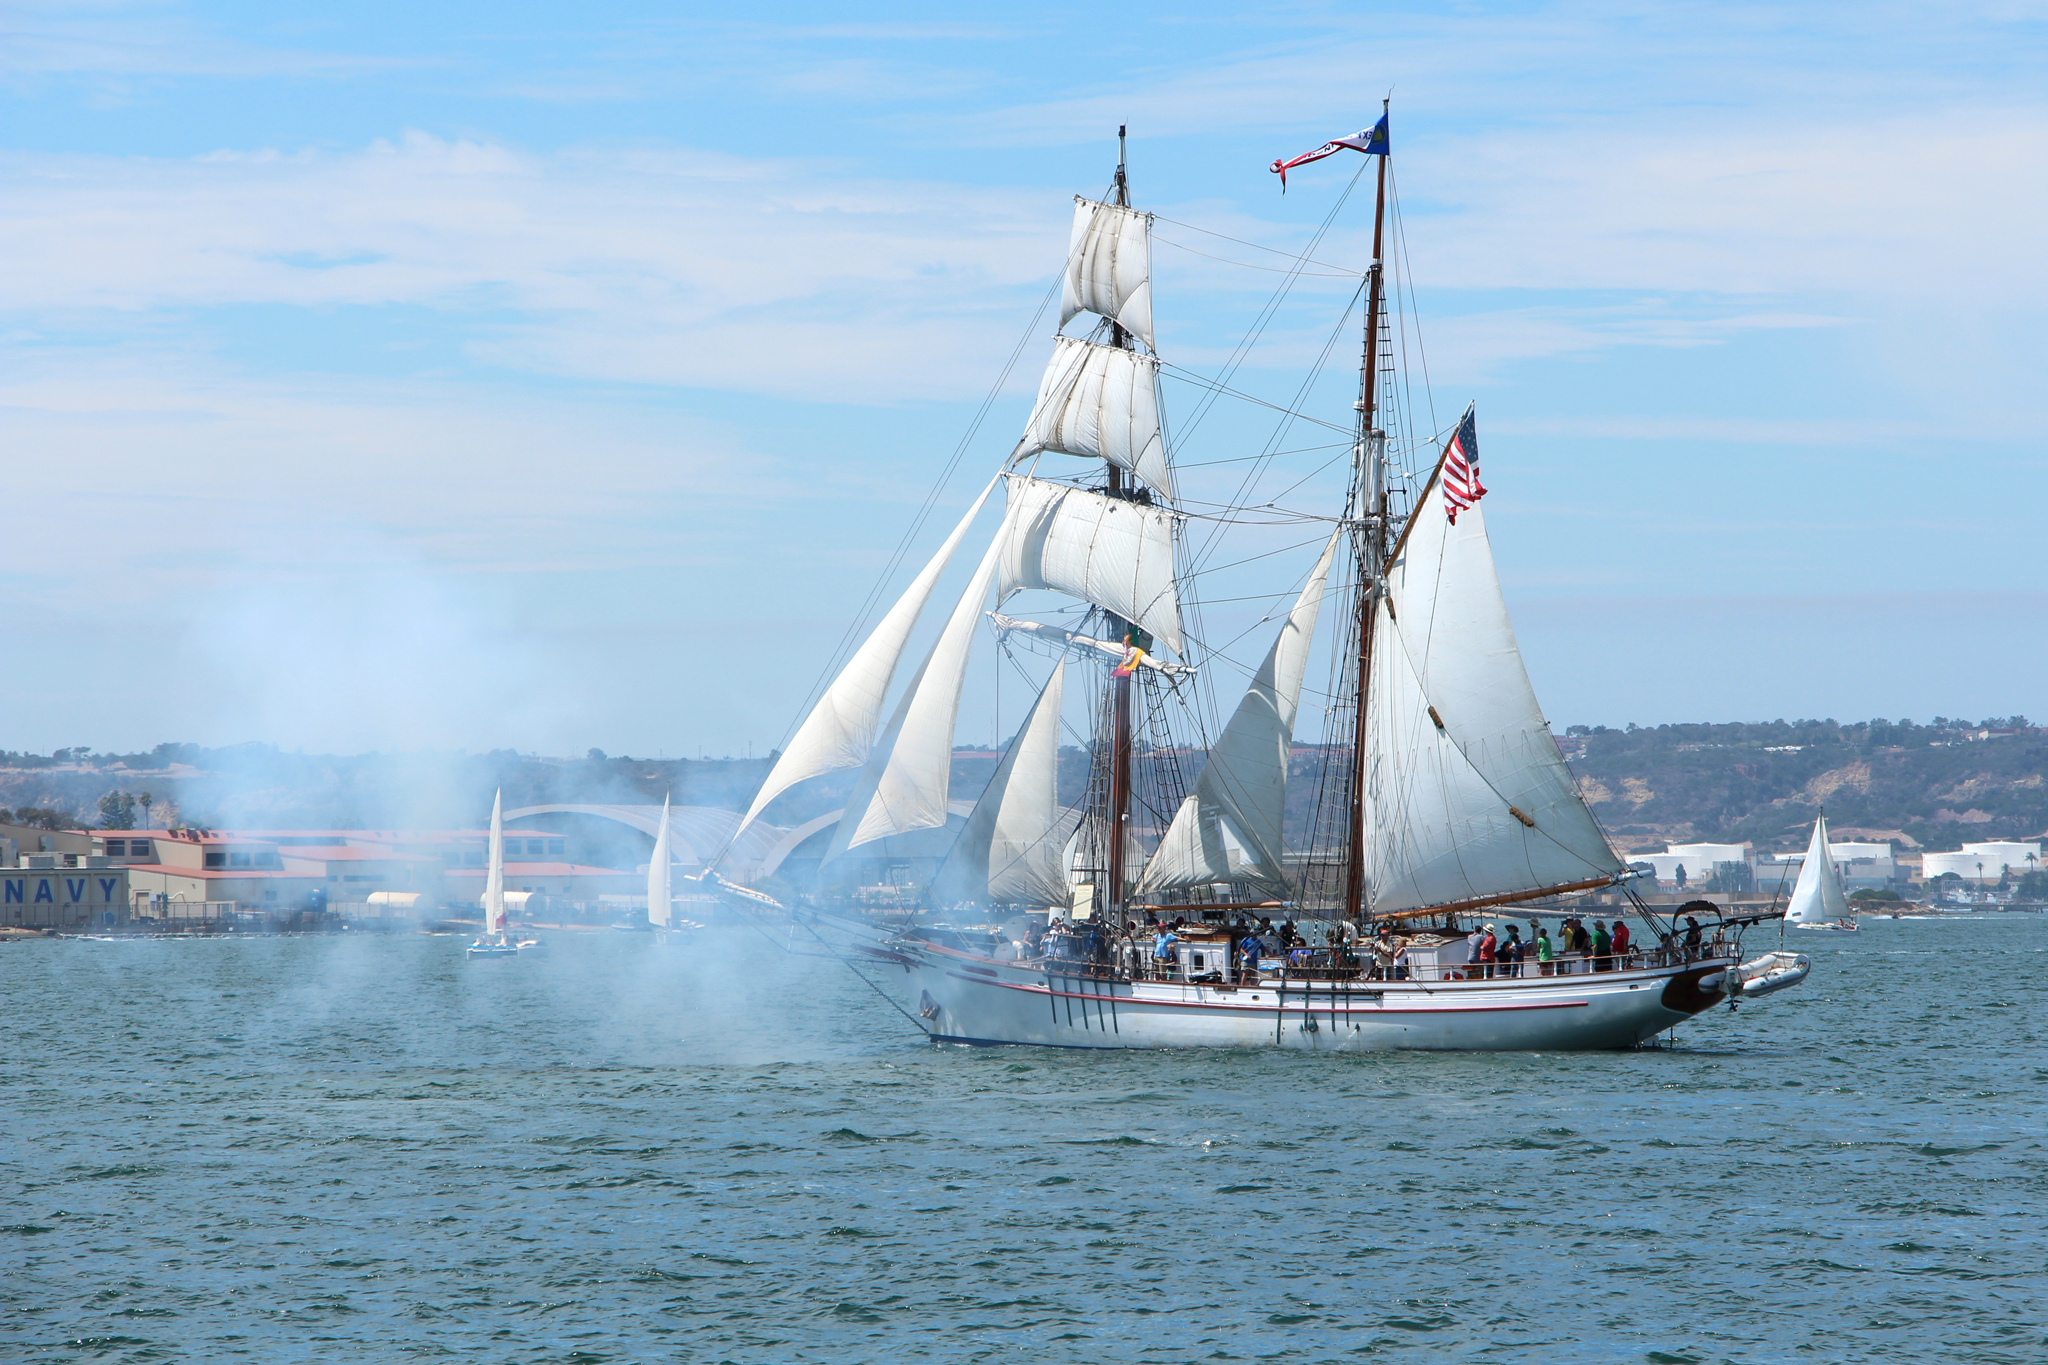 Festival of Sail – Cannon Battles and Tall Ships on San Diego Bay